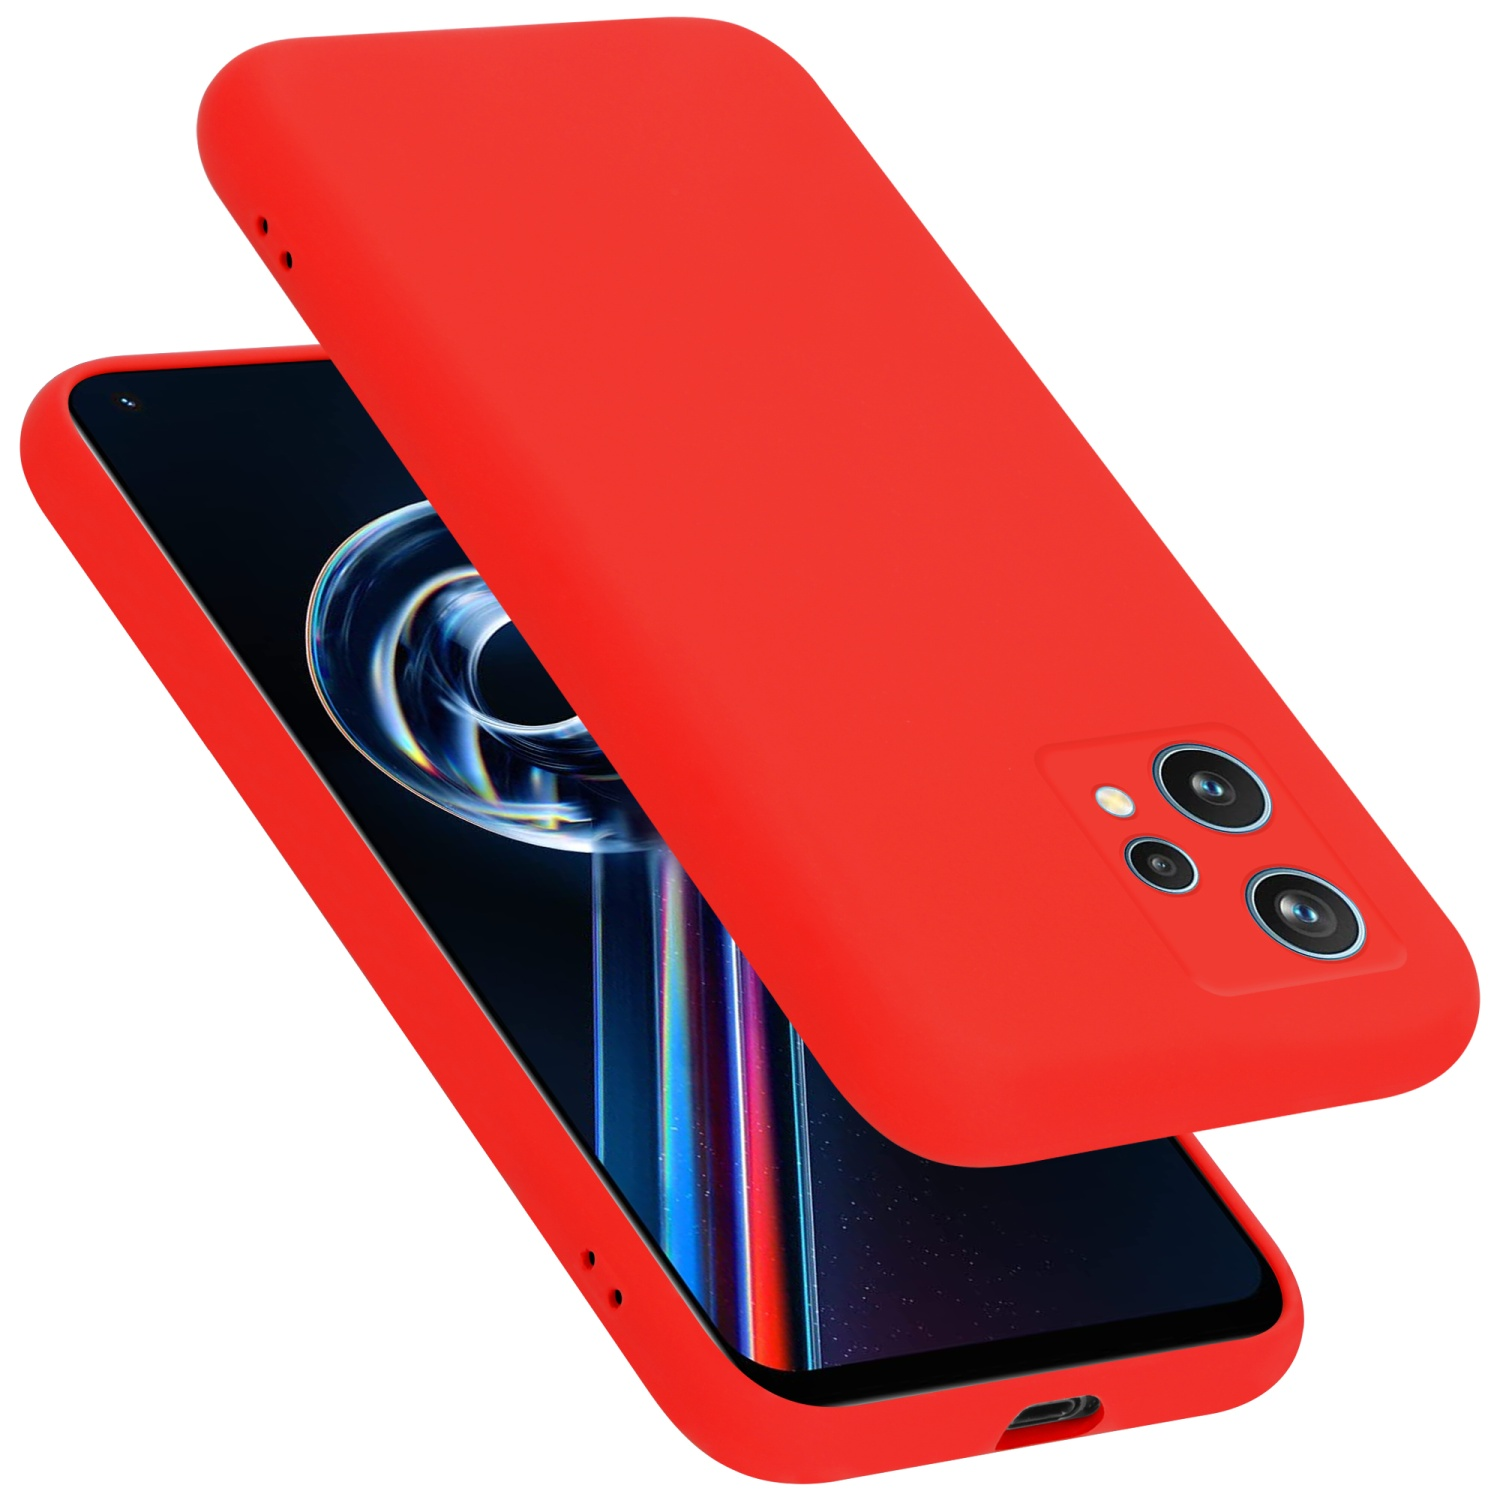 5G, / Silicone 9 ROT LITE Style, LIQUID CE 5G PRO / Liquid 2 / Nord OnePlus / 9 Realme, V25 CADORABO Hülle Case Q5 Backcover, im